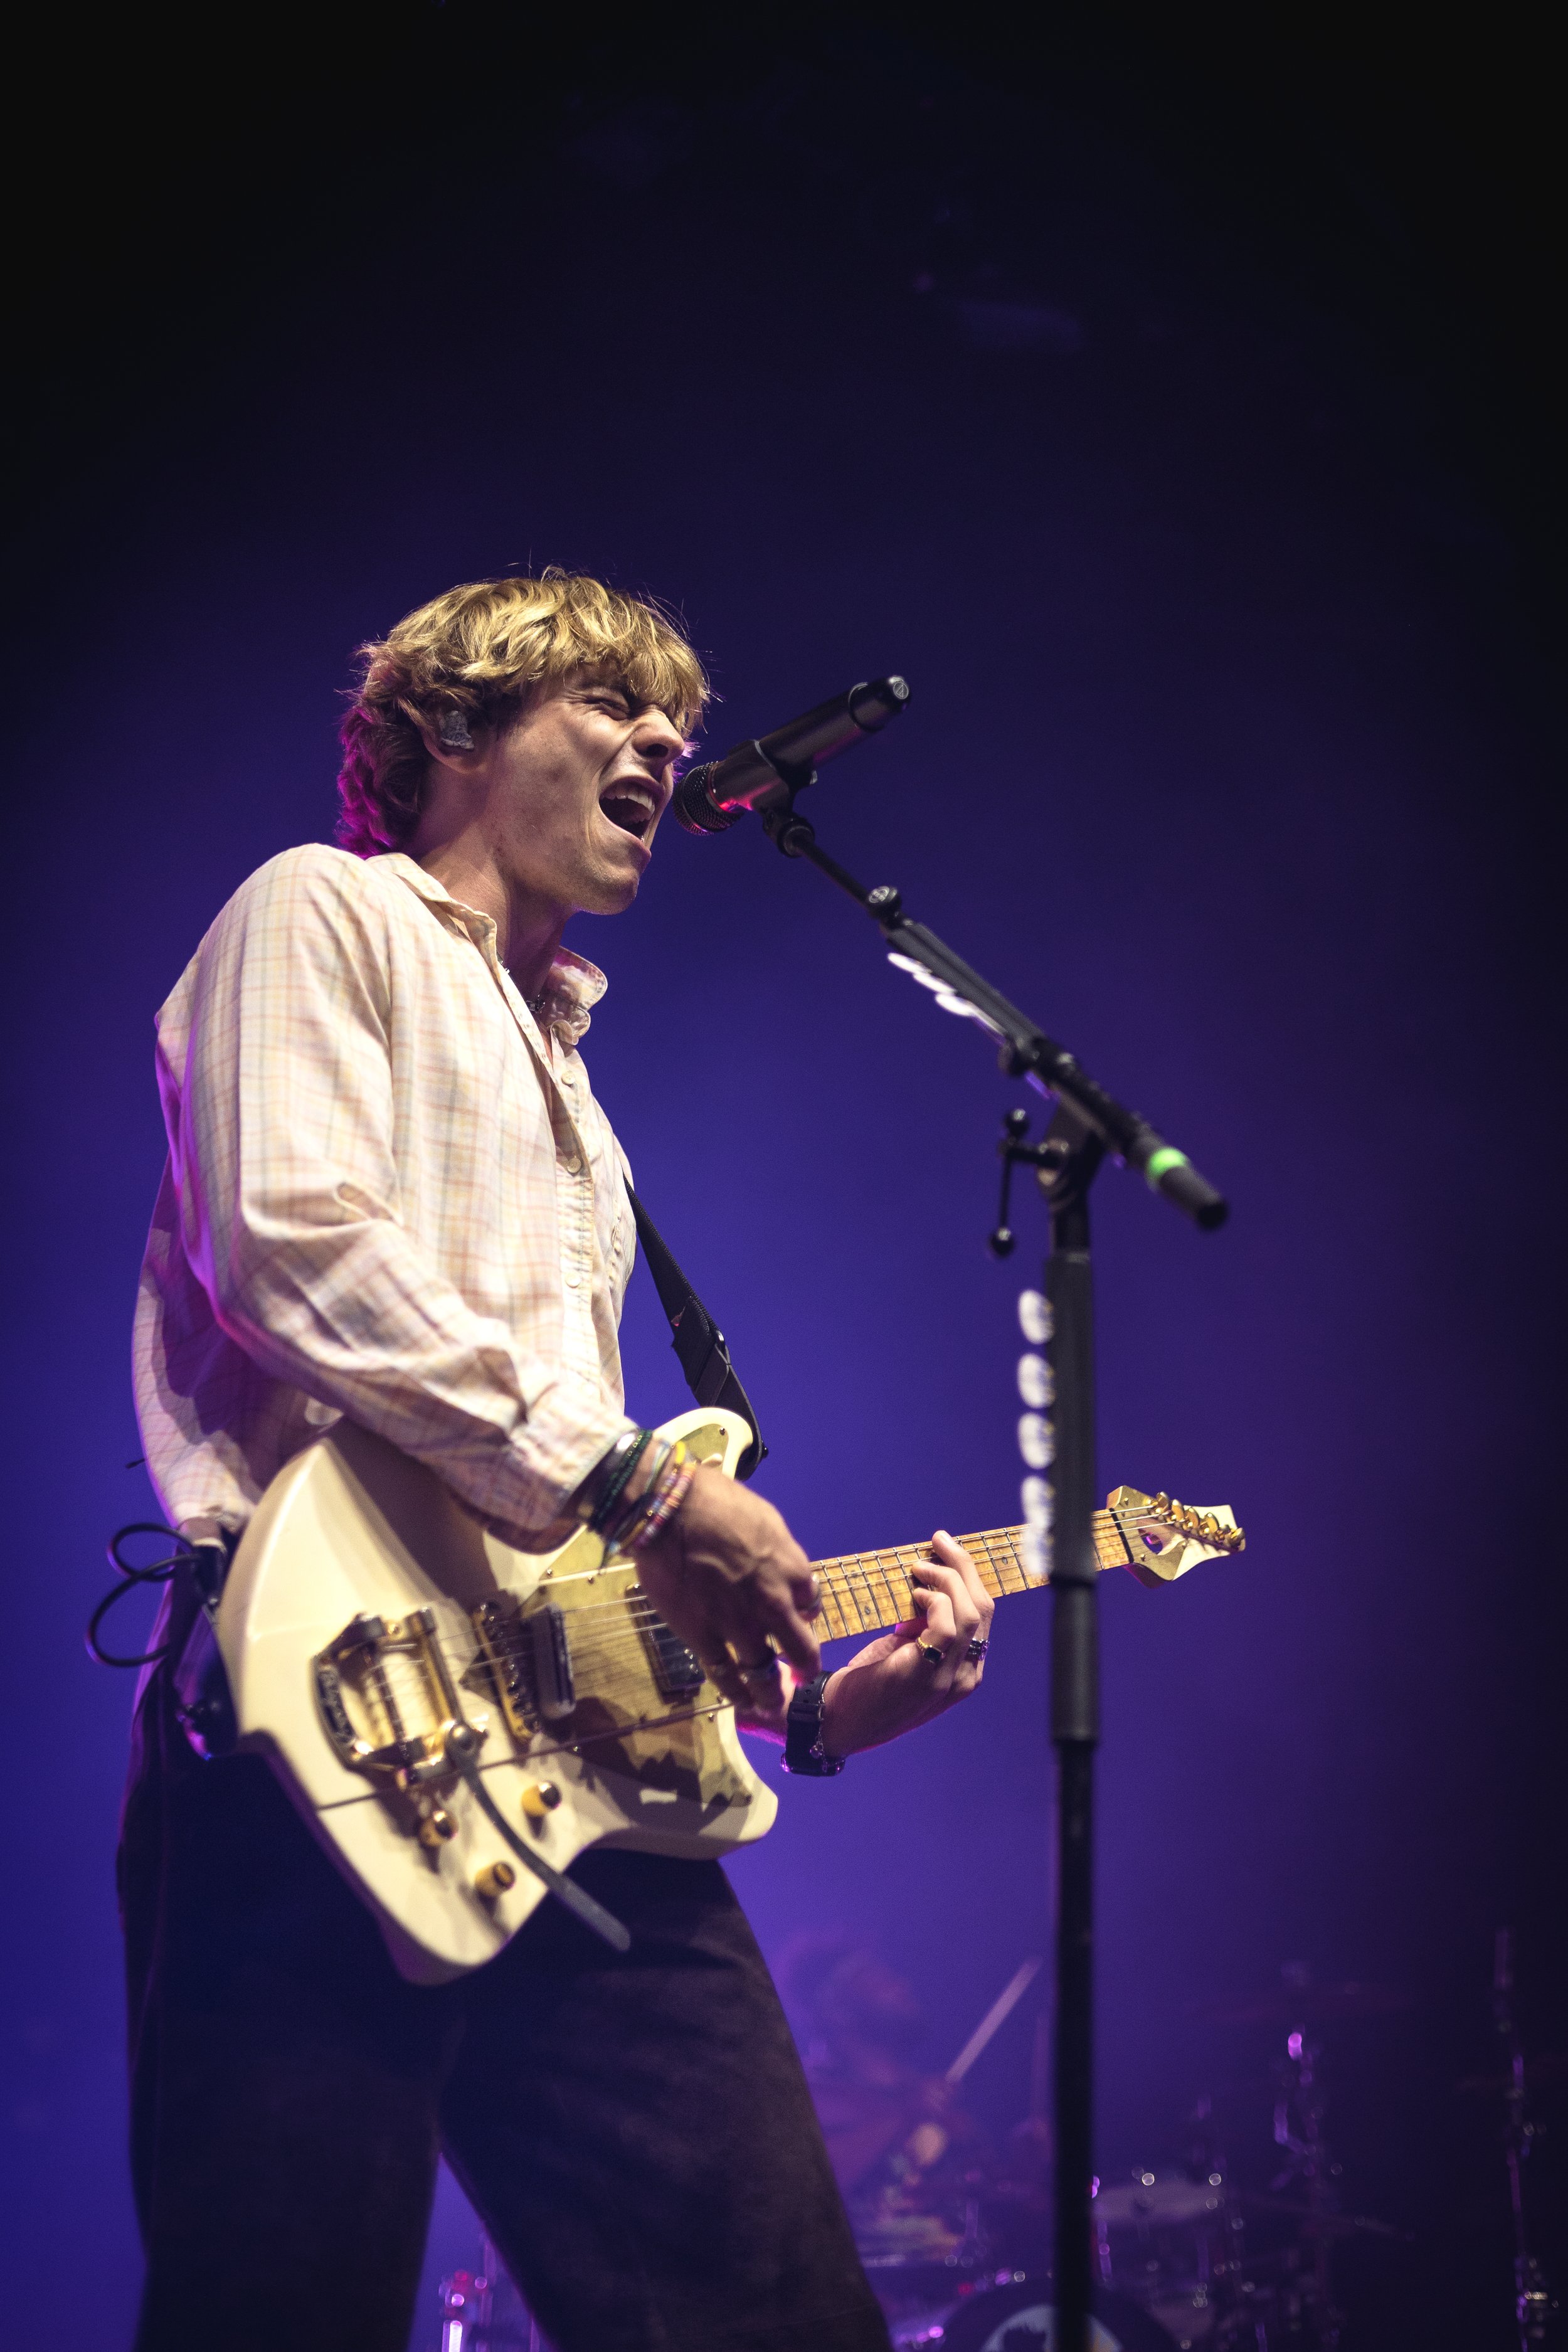  Ross Lynch serenades the crowd while putting his whole body into the performance. 